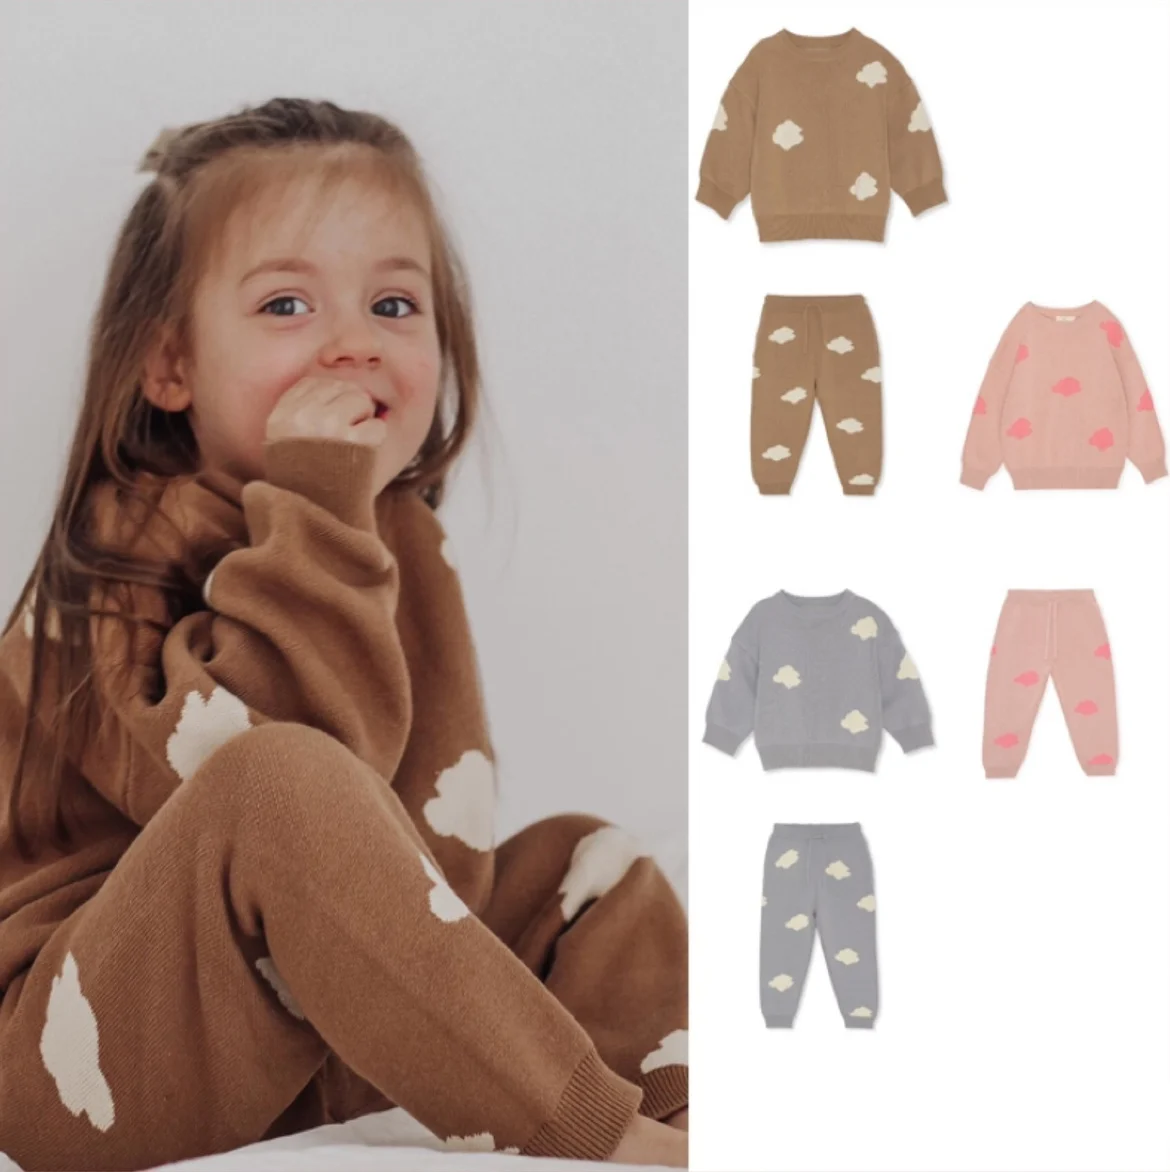 

Jenny&Dave Hot spot 23 autumn and winter children's knitting sweater sweater sweater suit boys and girls cloud knitting suit gir